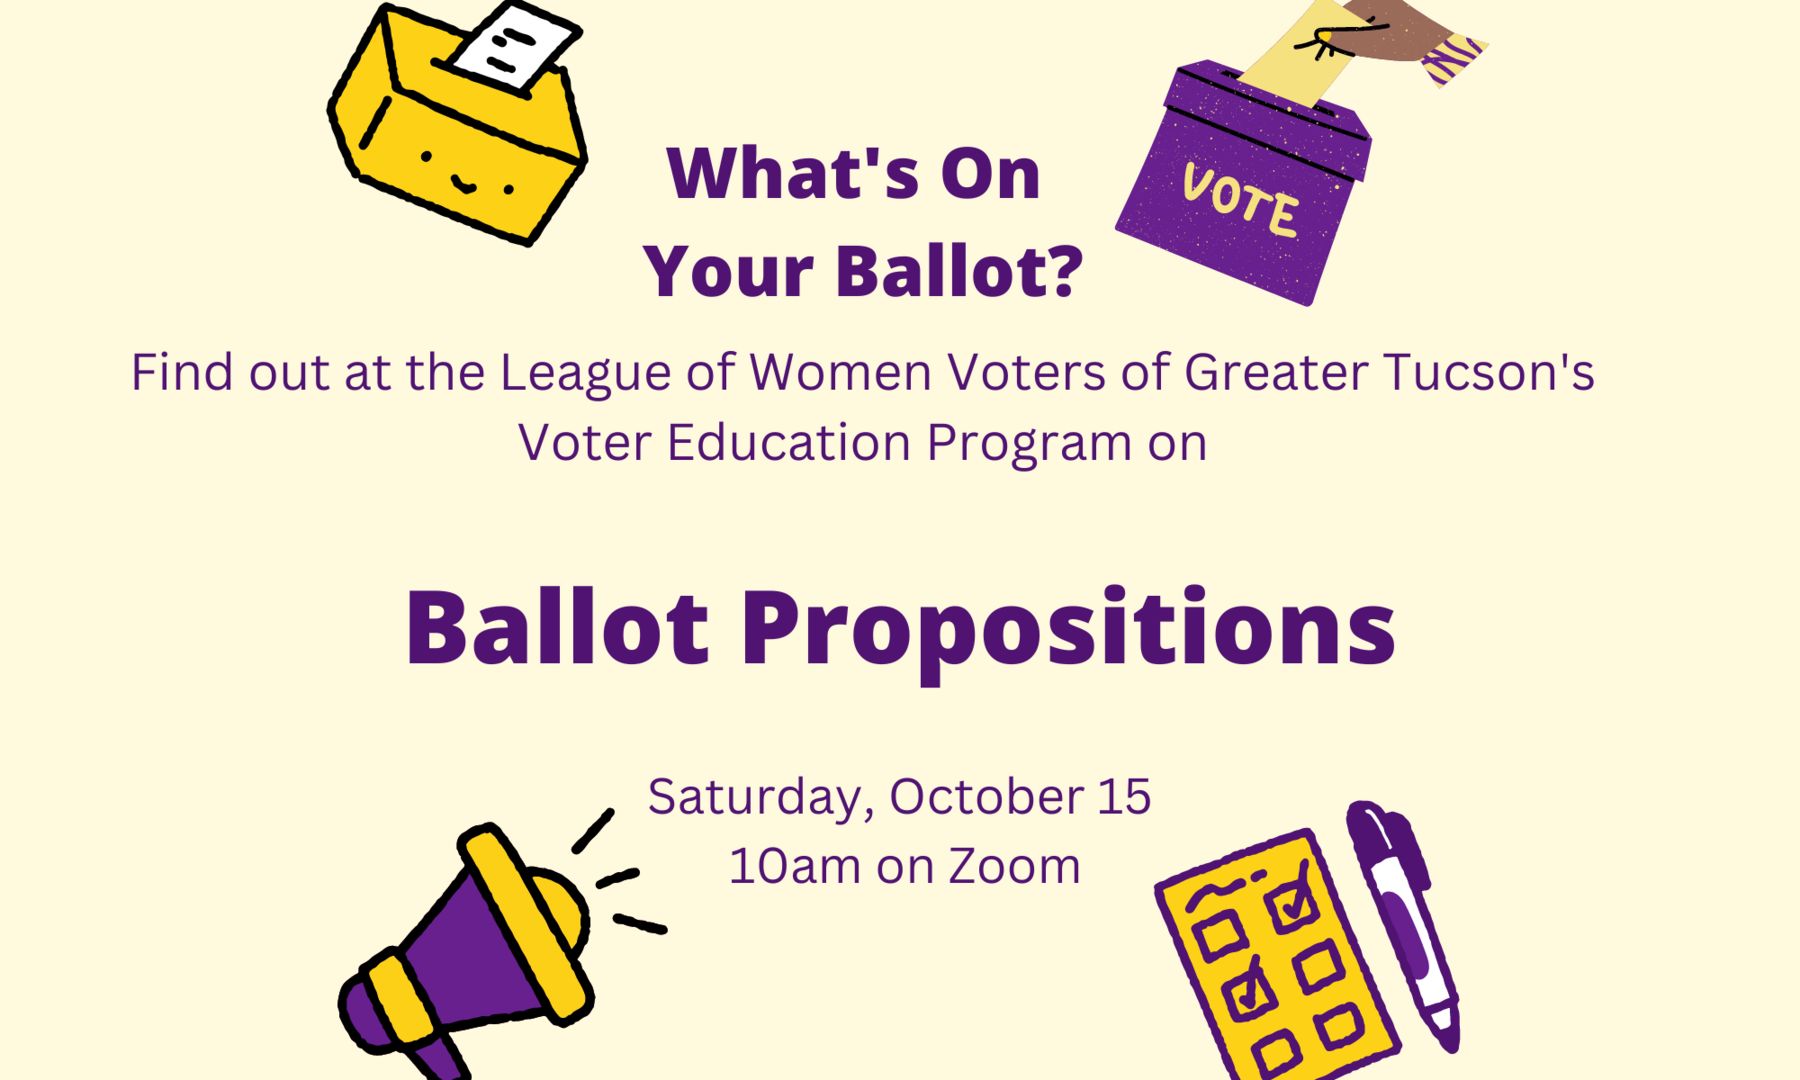 What's On Your Ballot? Learn All About the Propositions That Will Be on the Ballot on November 8th!, Online Event